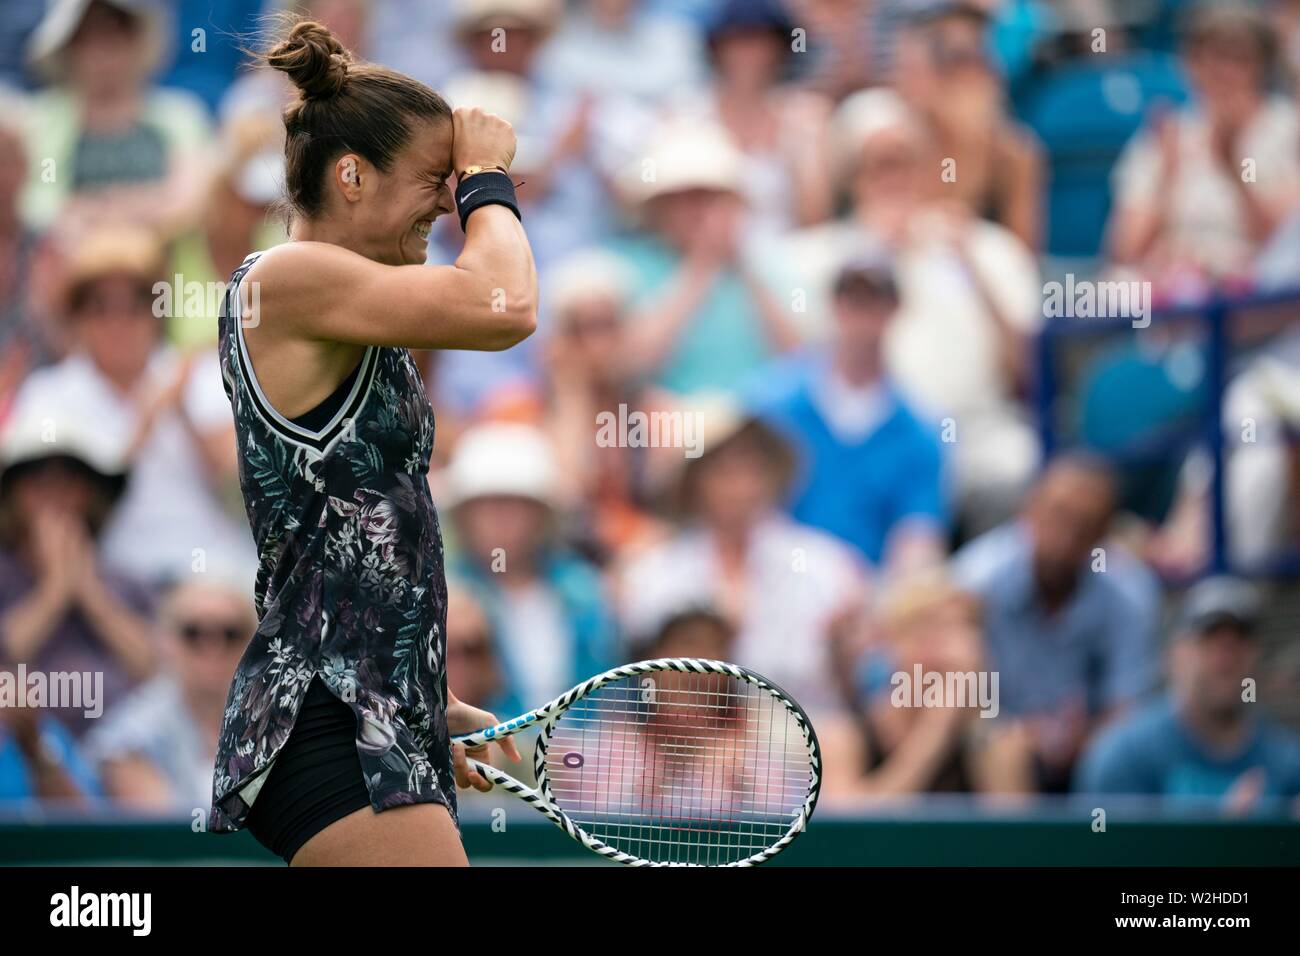 Maria Sakkari of Greece showing her frustration during match against Johanna Konta of GBR at Nature Valley International 2019, Devonshire Park, Eastbo Stock Photo